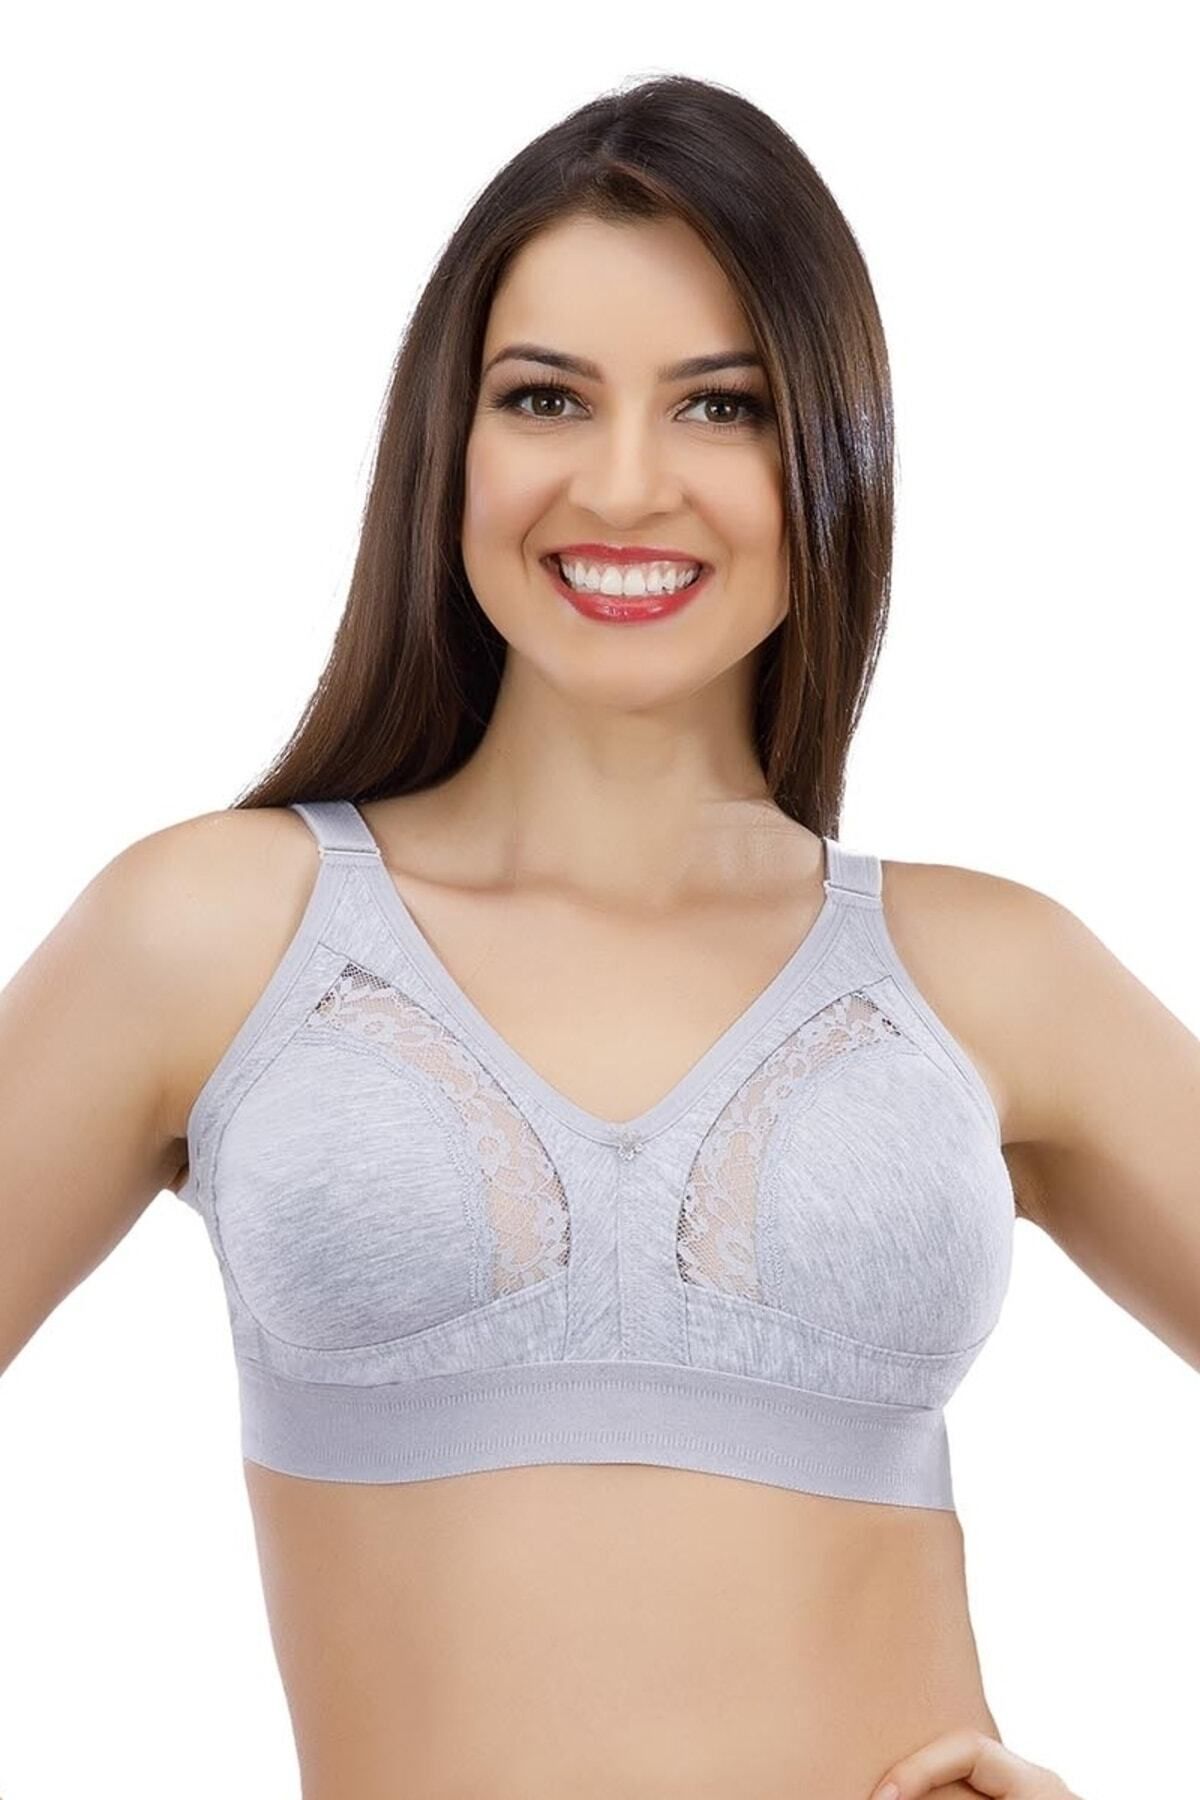 Liza - Combed Cotton Fabric, Wide Band at the Bottom, Adjustable Straps,  King Size Supporting Bra